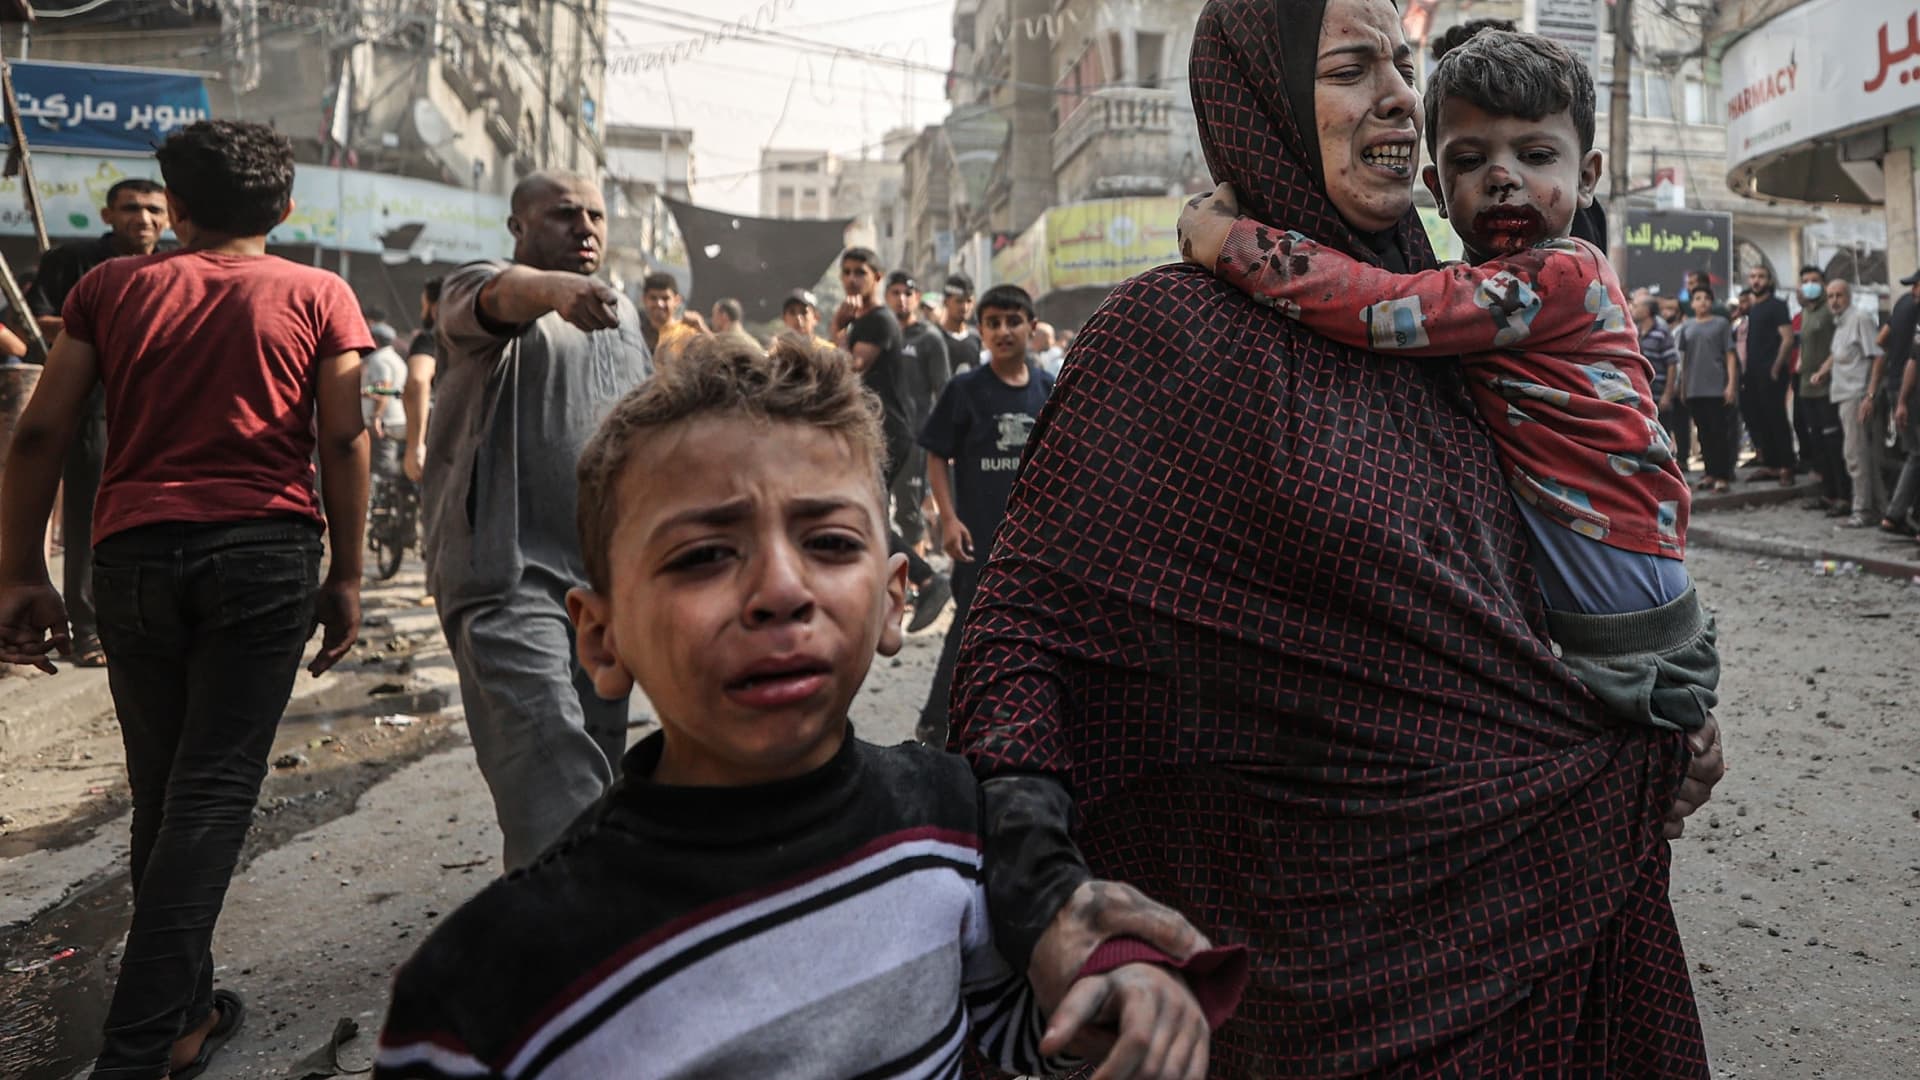 (EDITORS NOTE: Image depicts graphic content) A woman and children, all injured, try to get to the safety amid destruction and chaos caused by Israeli airstrikes on Bureij refugee camp in central Gaza Strip on November 02, 2023. (Photo by Mustafa Hassona/Anadolu via Getty Images)